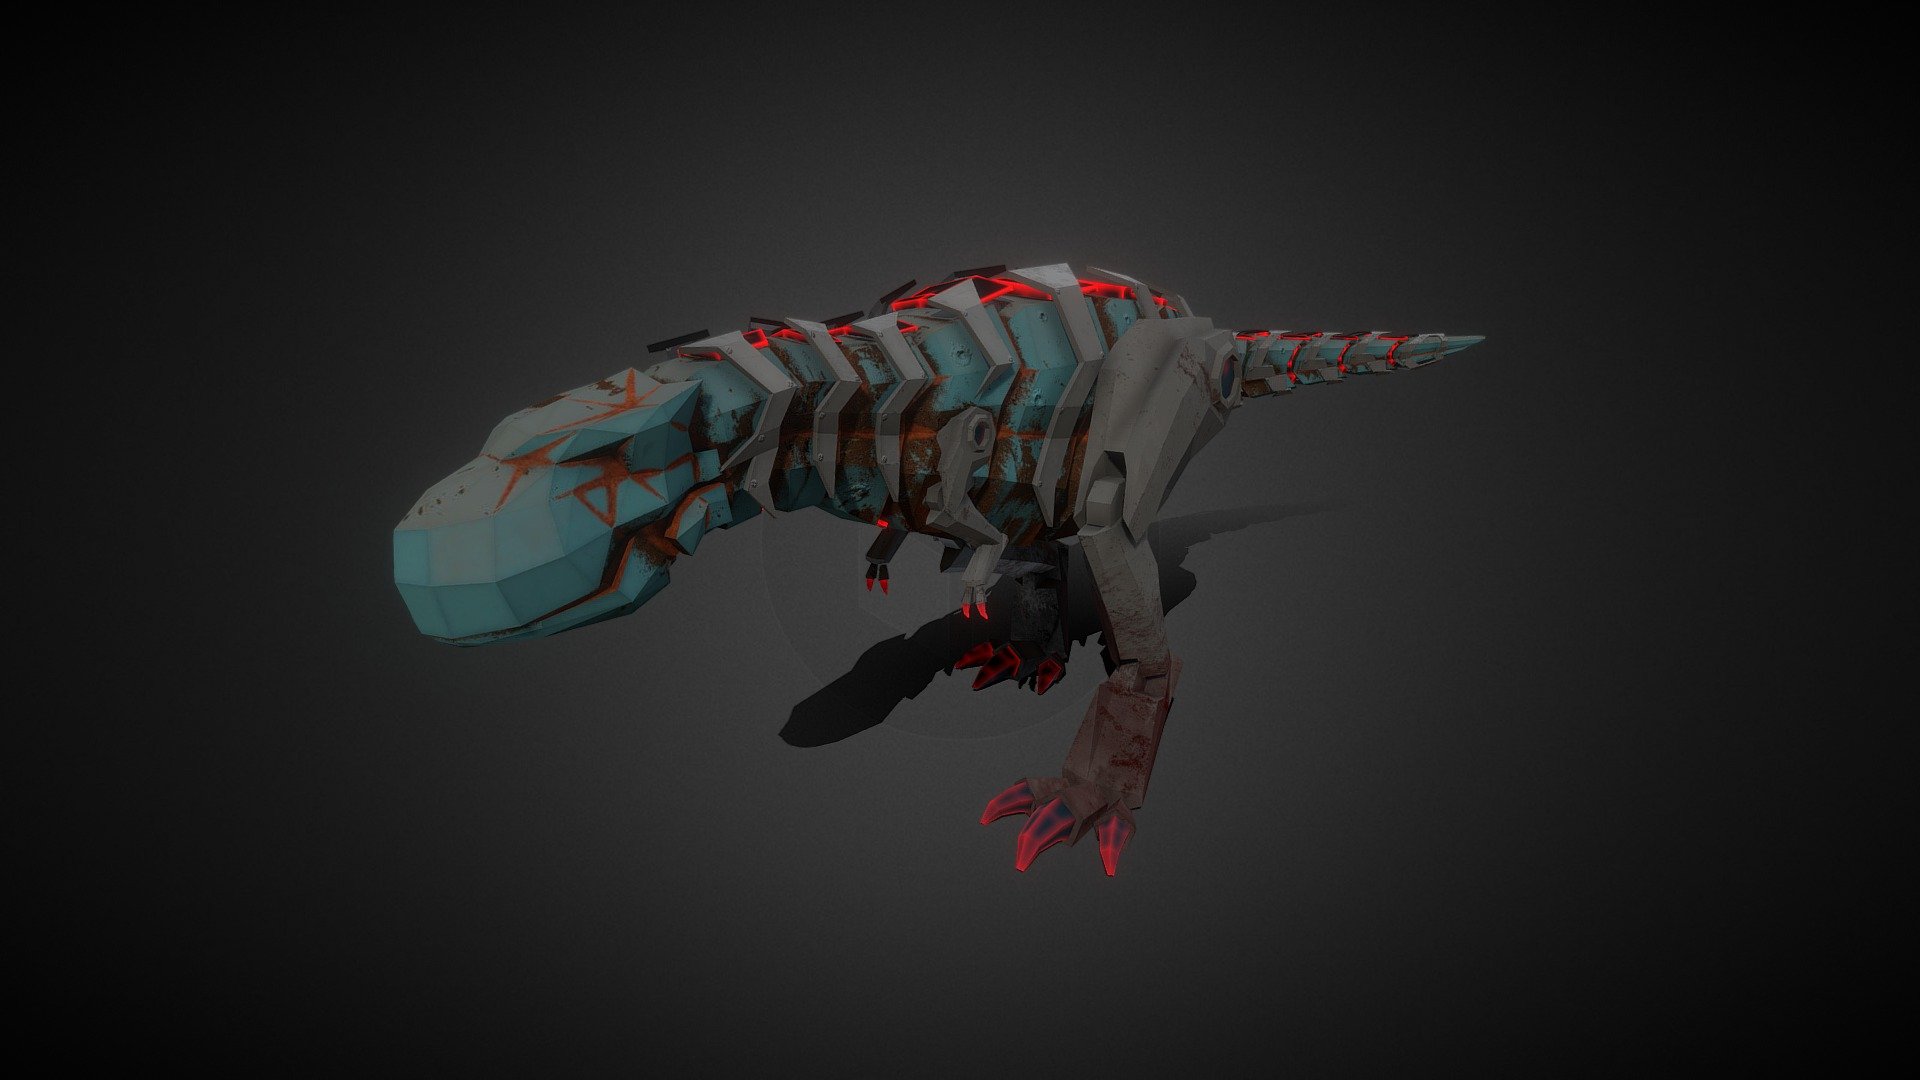 There's an updated version of this T-Rex in my profile. 
If you download the model make sure to like it. Thank you!
I made this model for one of my class and I put simple textures on it to practice UV mapping.
https://www.artstation.com/jeromeangeles - Low Poly T Rex (Walk Cycle) - Free Download - Download Free 3D model by Jerome Angeles (@jeromeangeles) 3d model